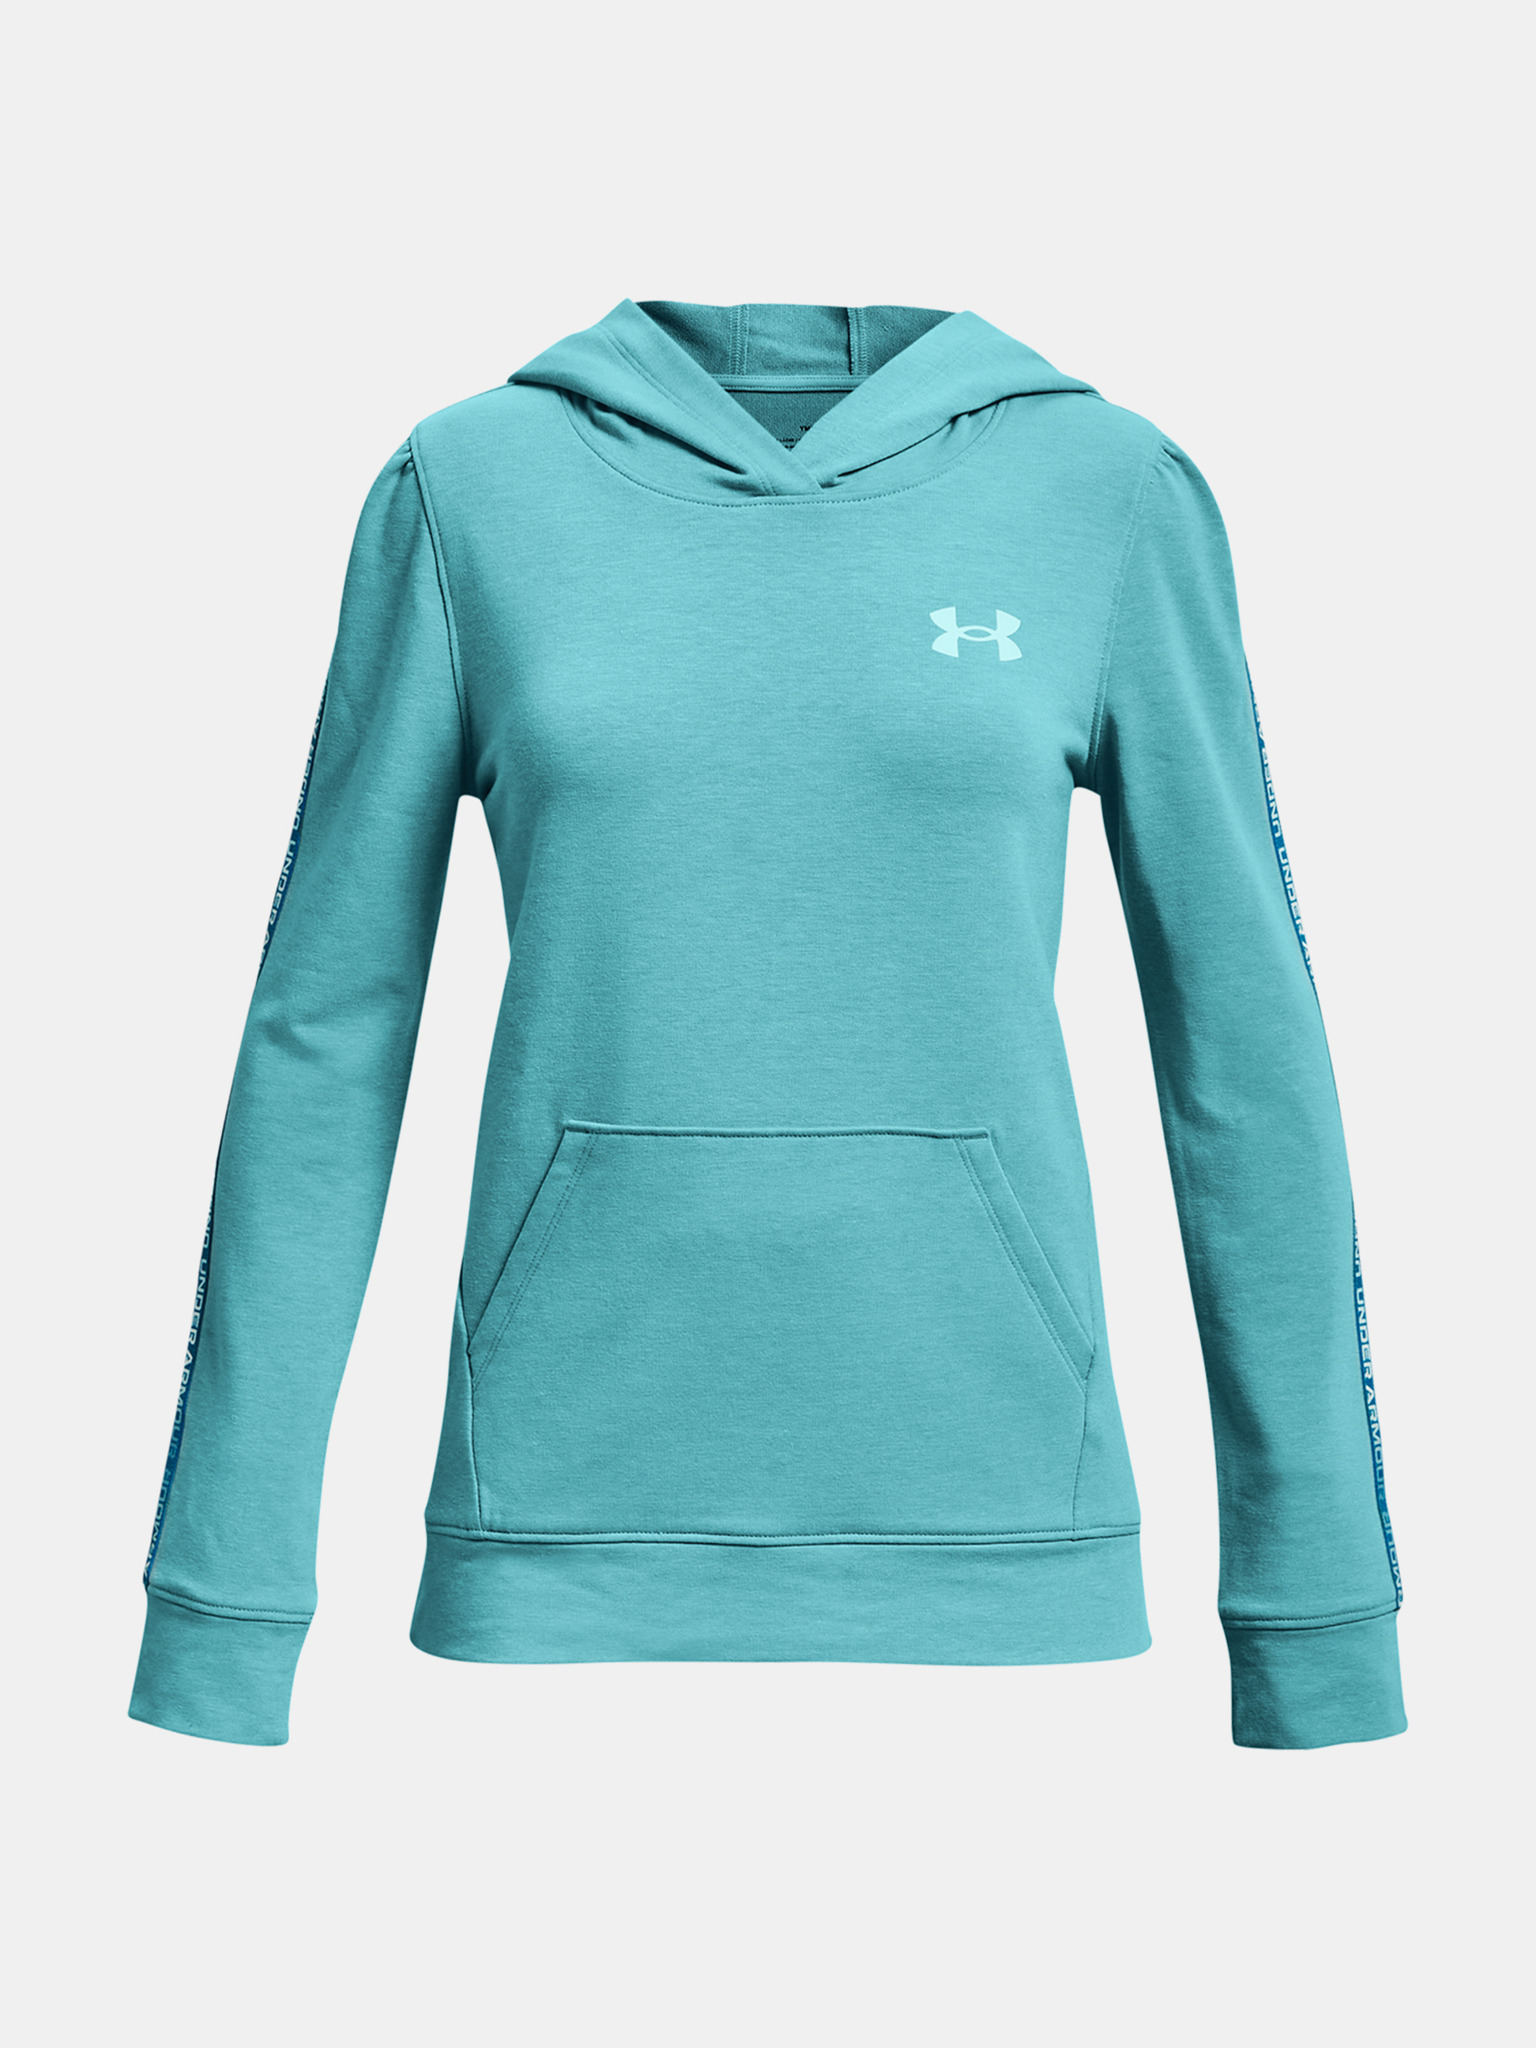 Under Armour, Tops, Womens Under Armour Hoodie Sweatshirt Teal Camo Sz  Small Loose